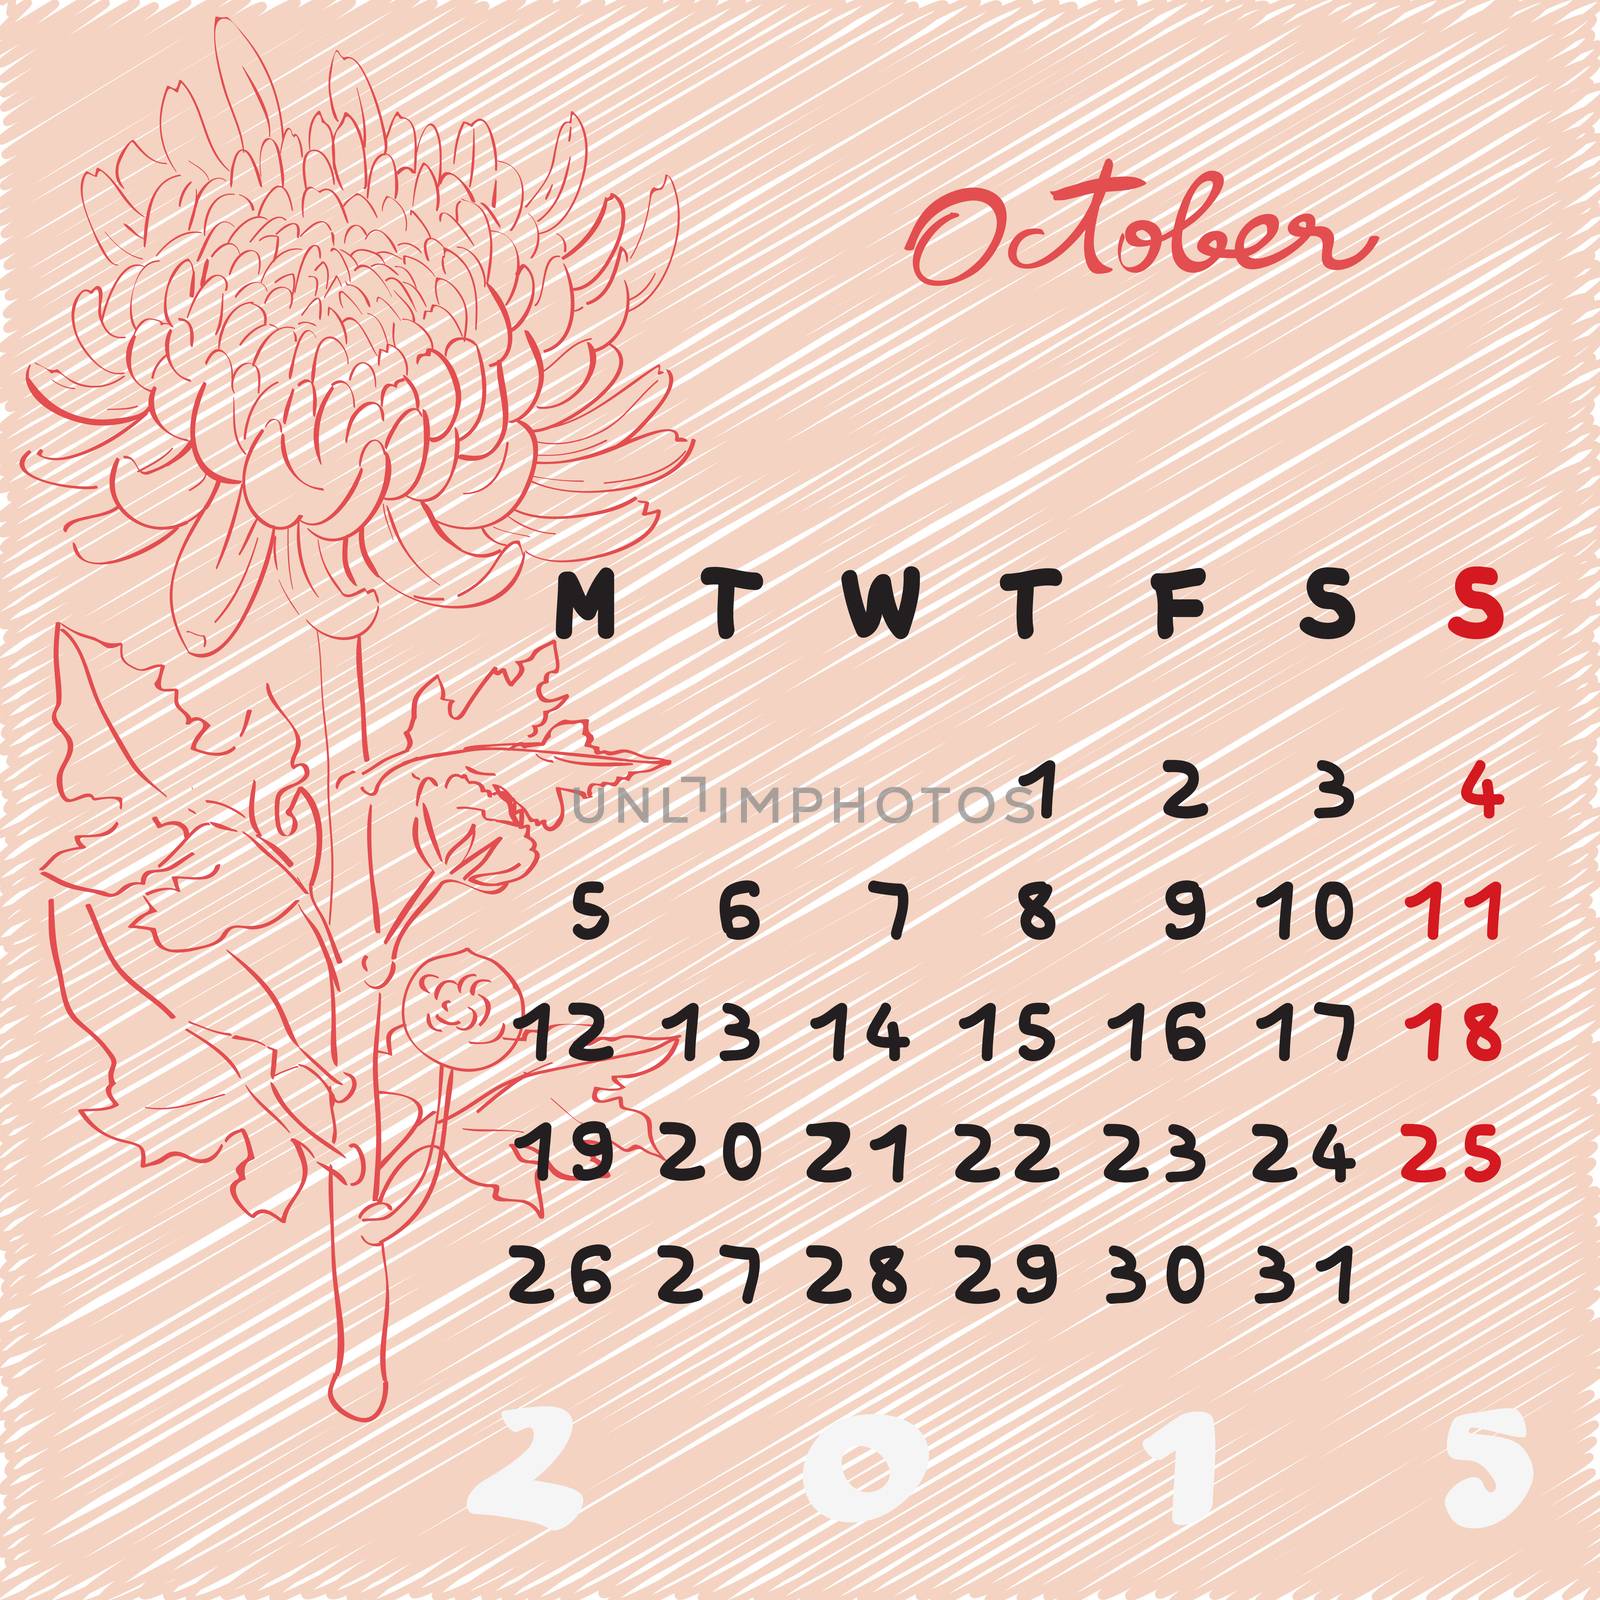 Calendar 2015, graphic illustration of October month calendar with original hand drawn text and chrysanthemum flower sketch